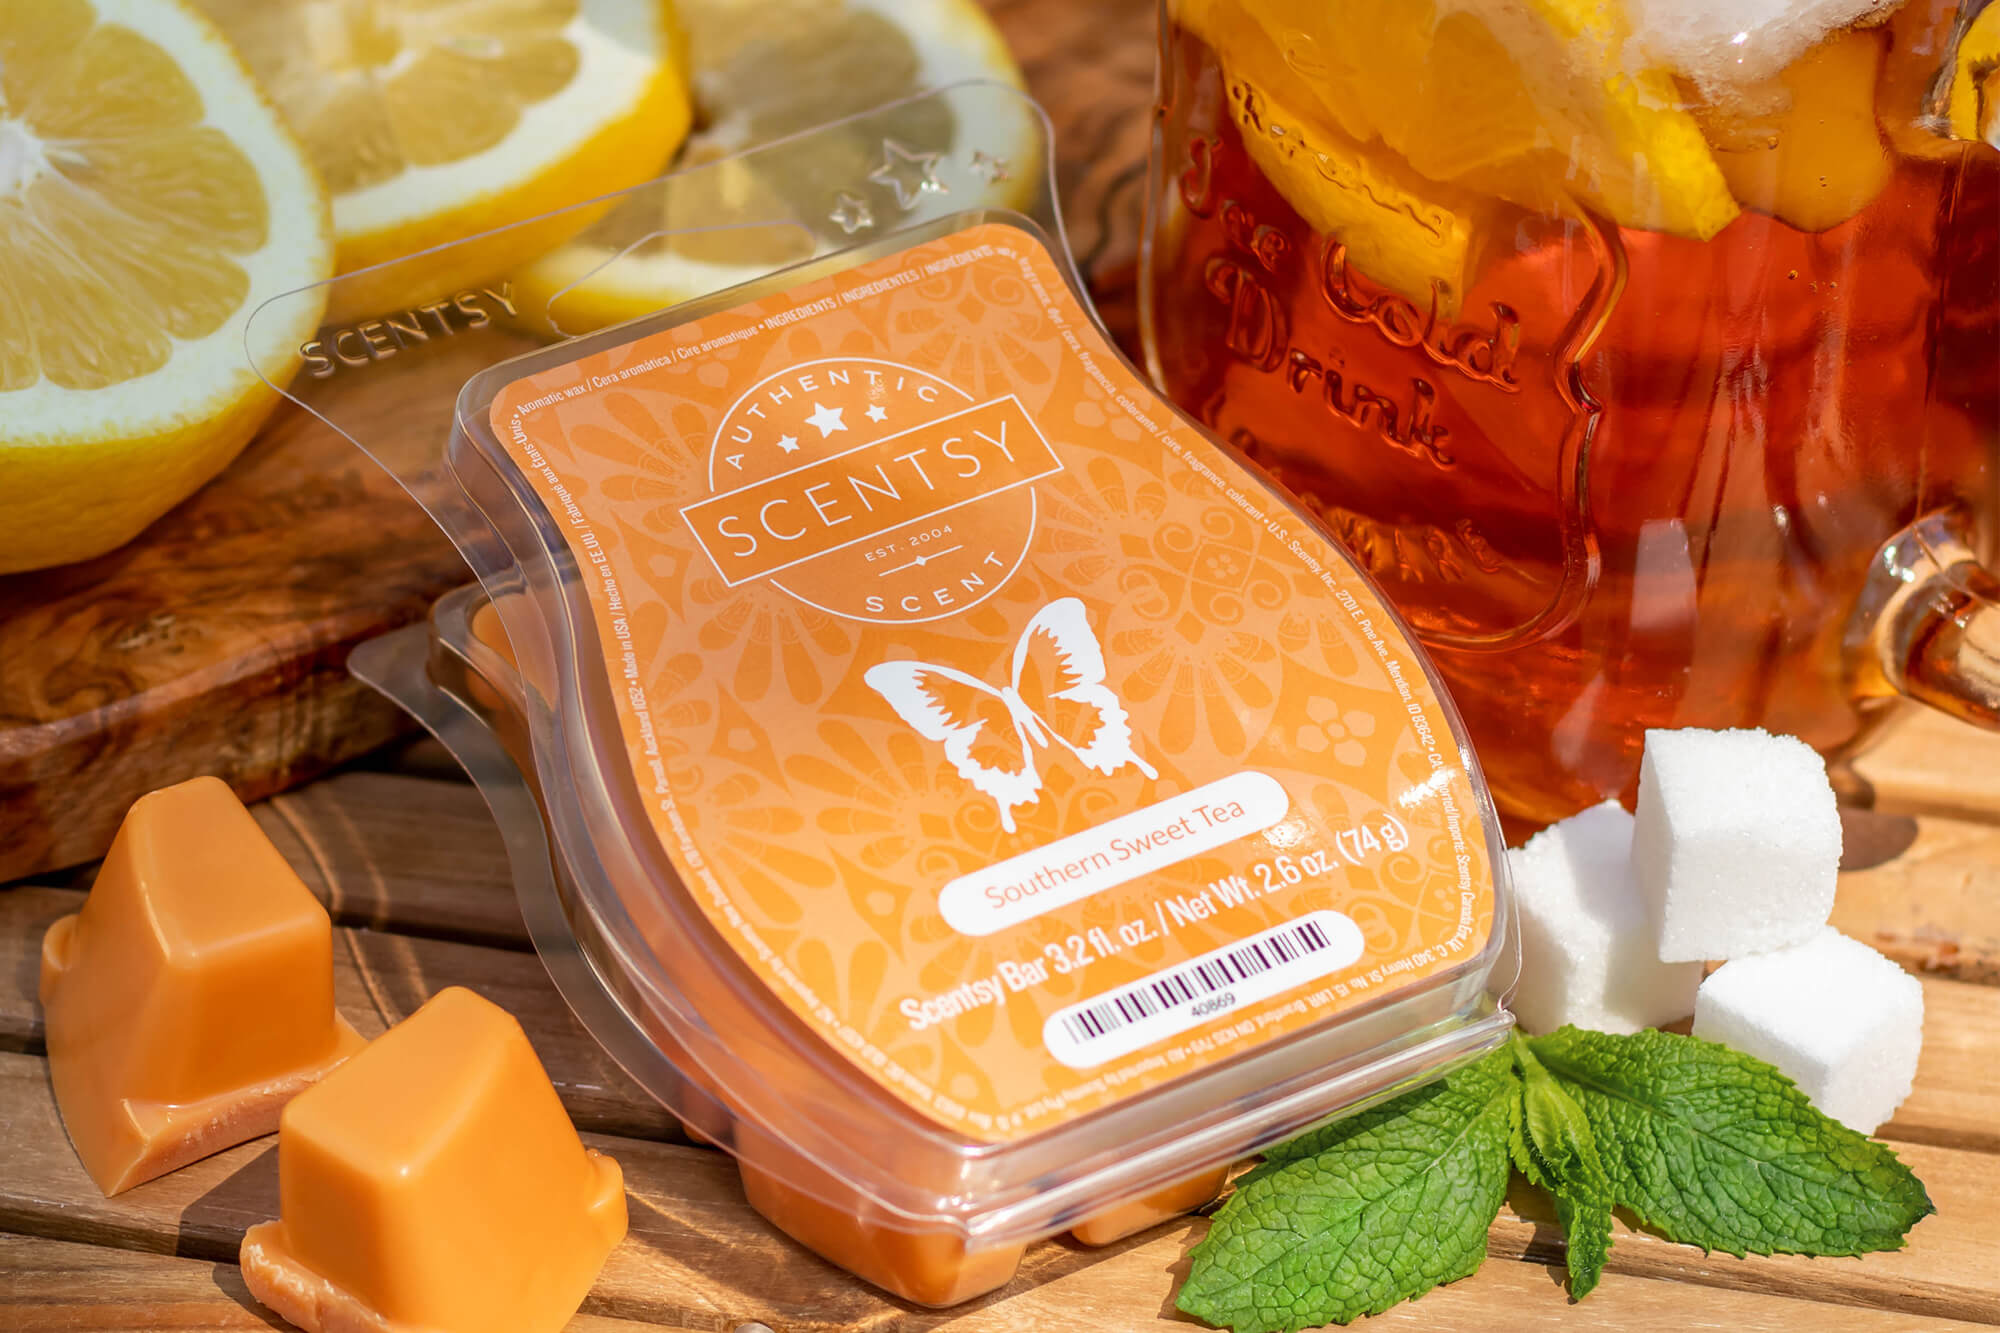 Scentsy Southern Sweet Tea wax bar surrounded by lemon, sweet tea, sugar cubes, and mint